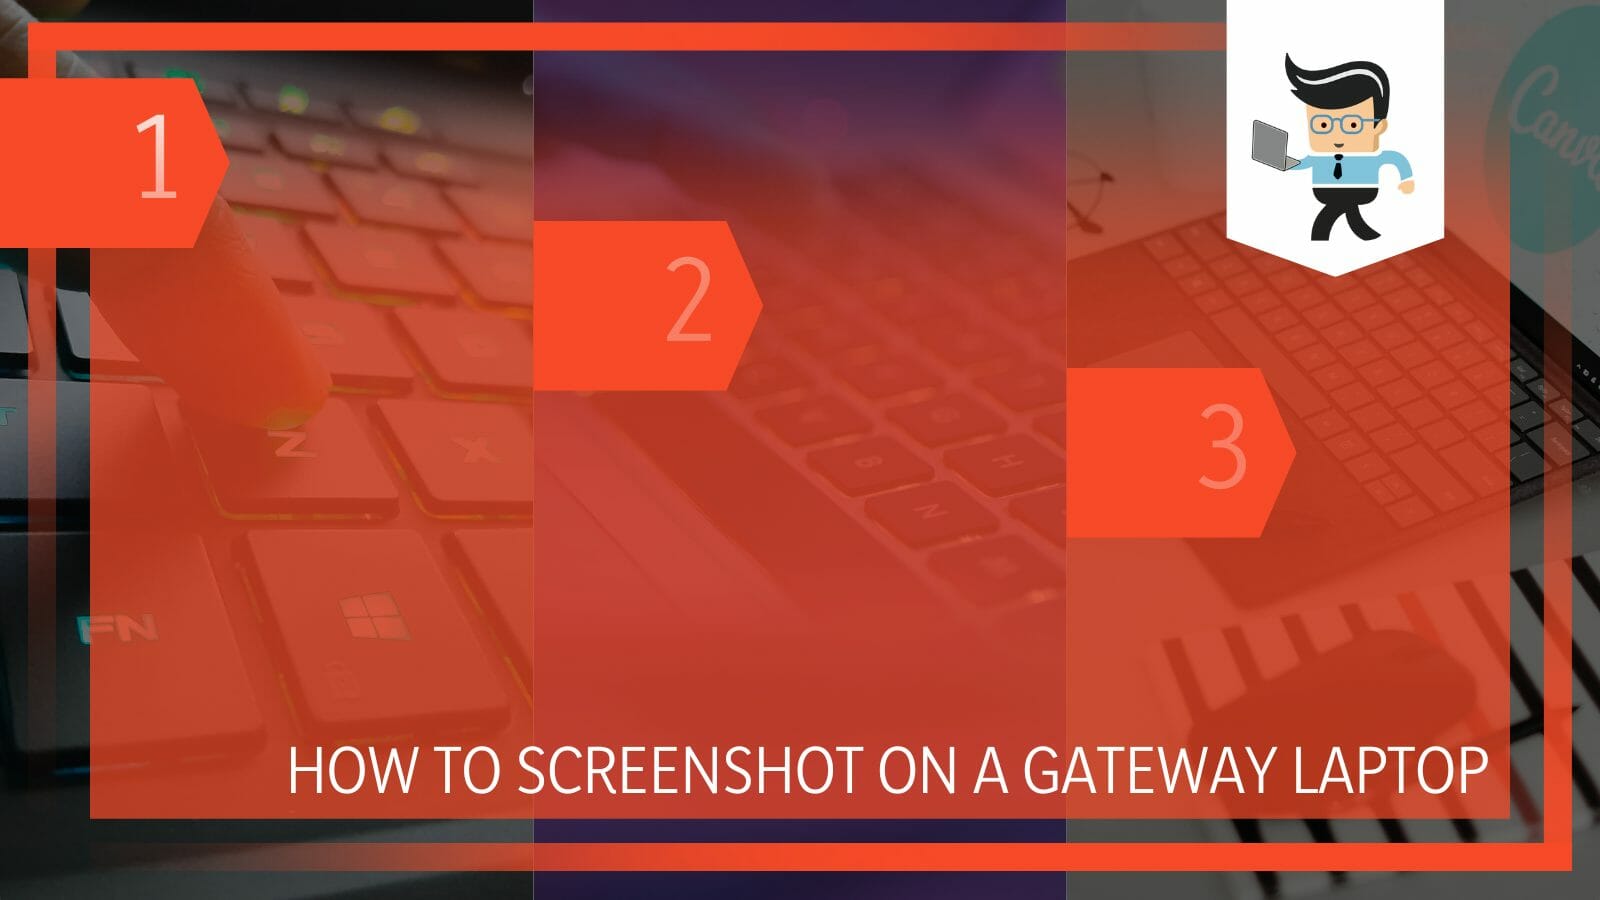 How To Screenshot on a Gateway Laptop